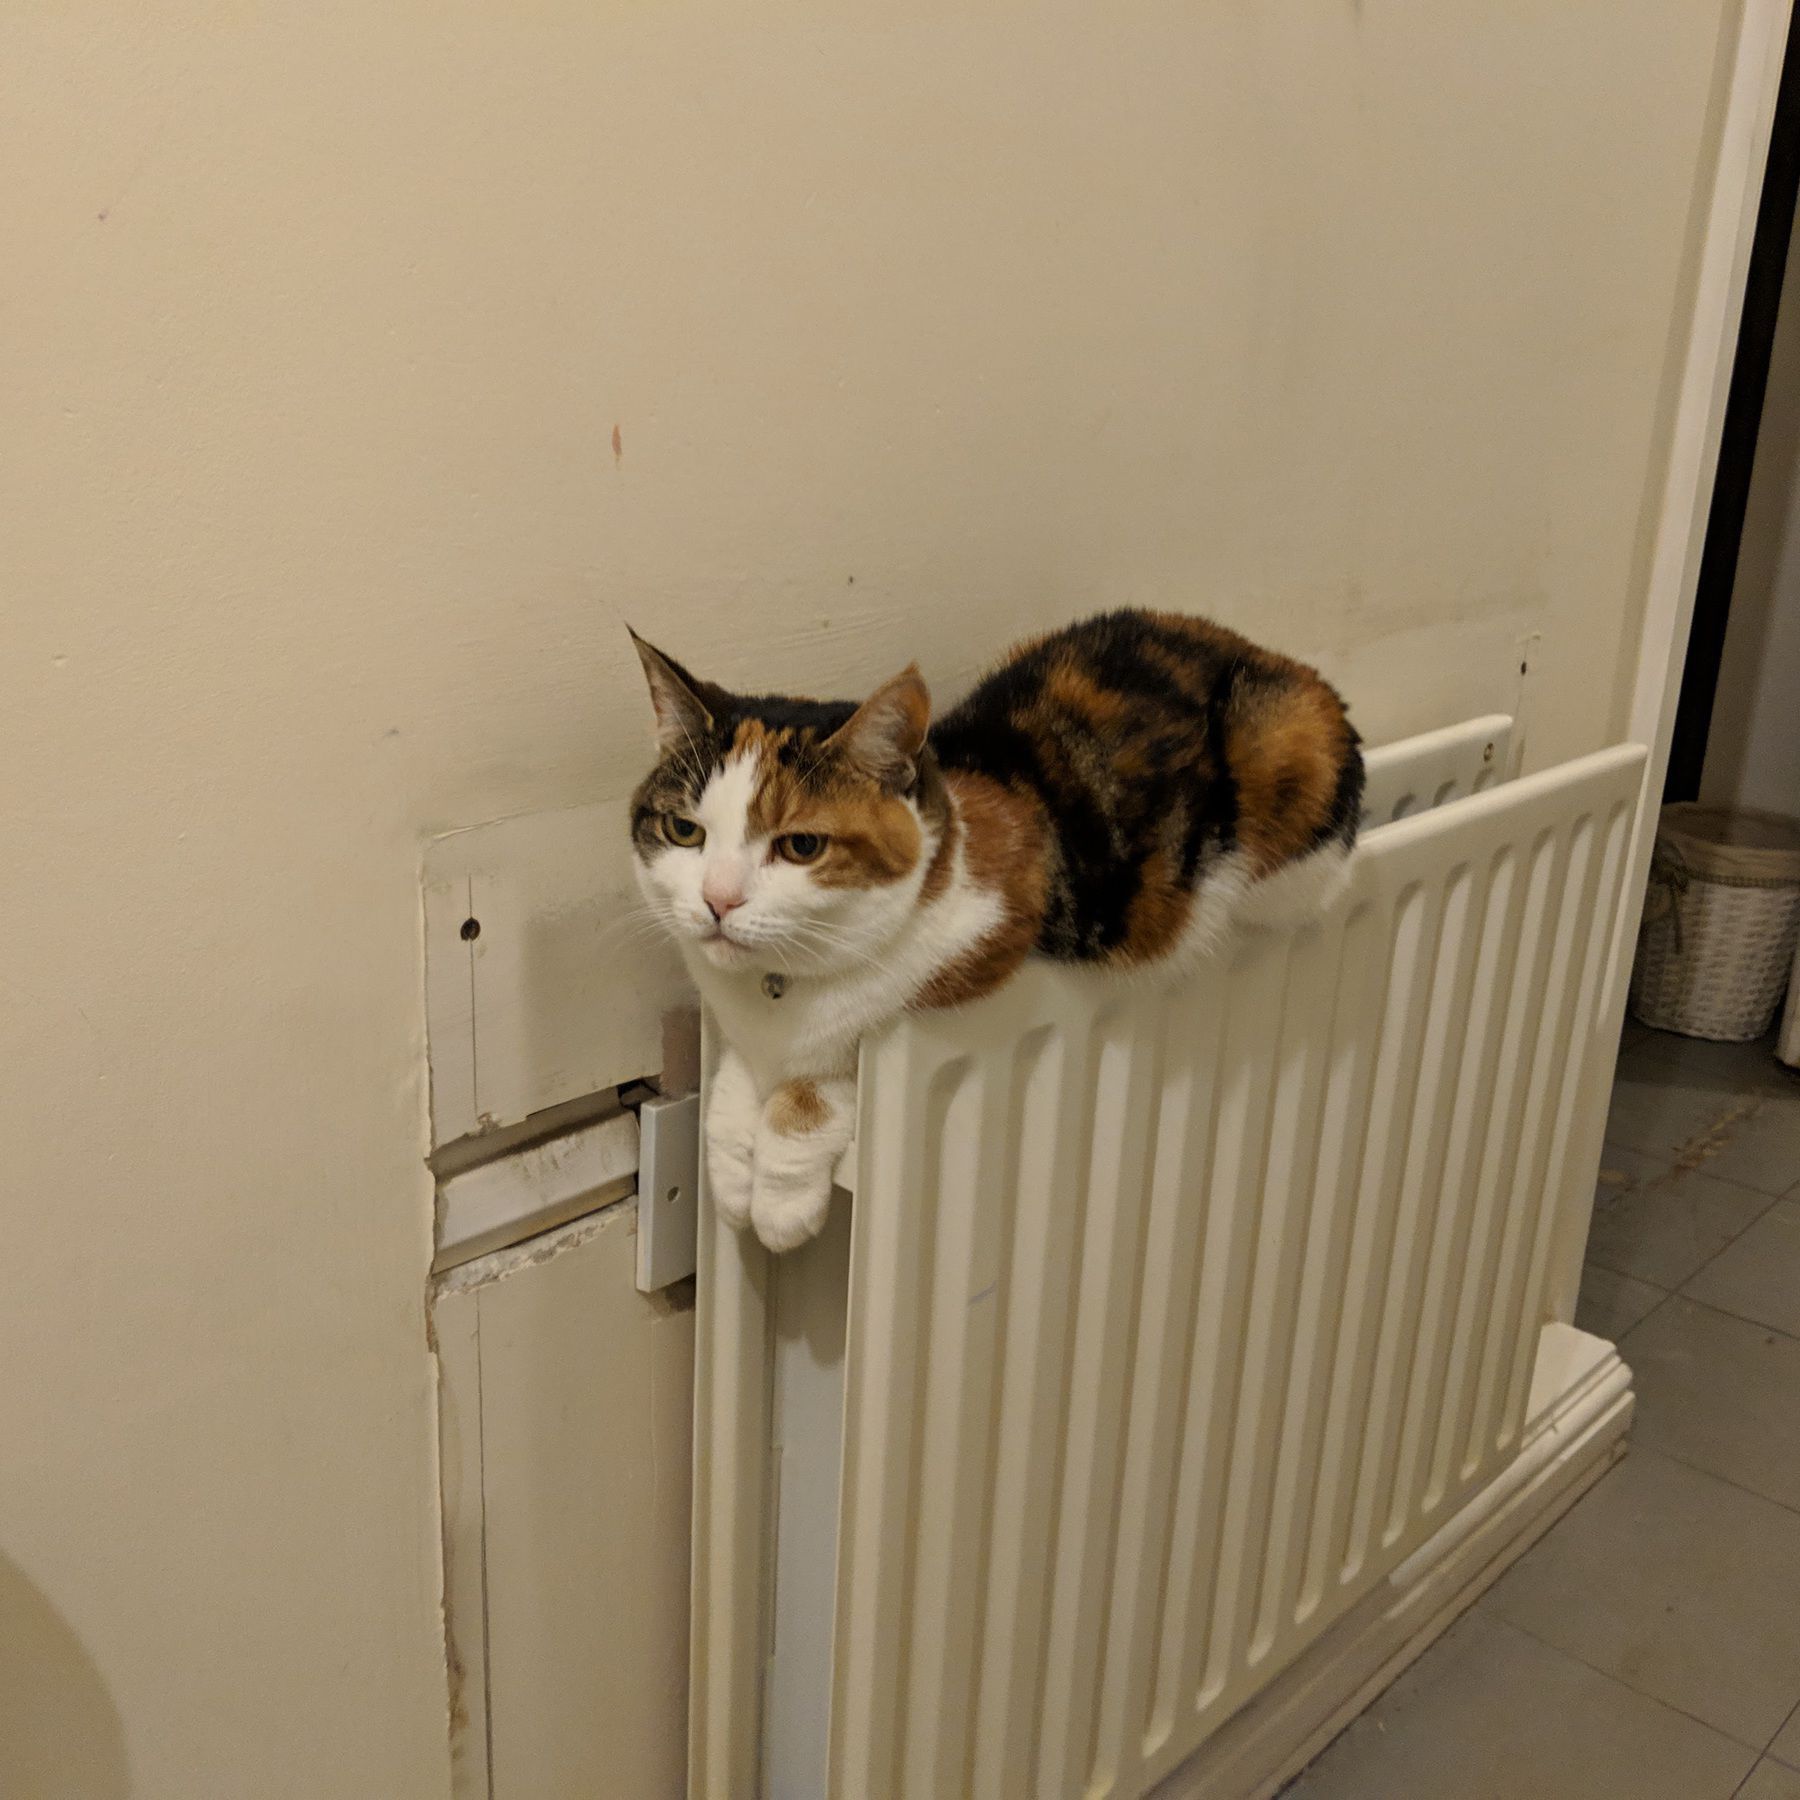 Calico cat lying on top of a radiator, tucked in with both front paws draped over the edge.